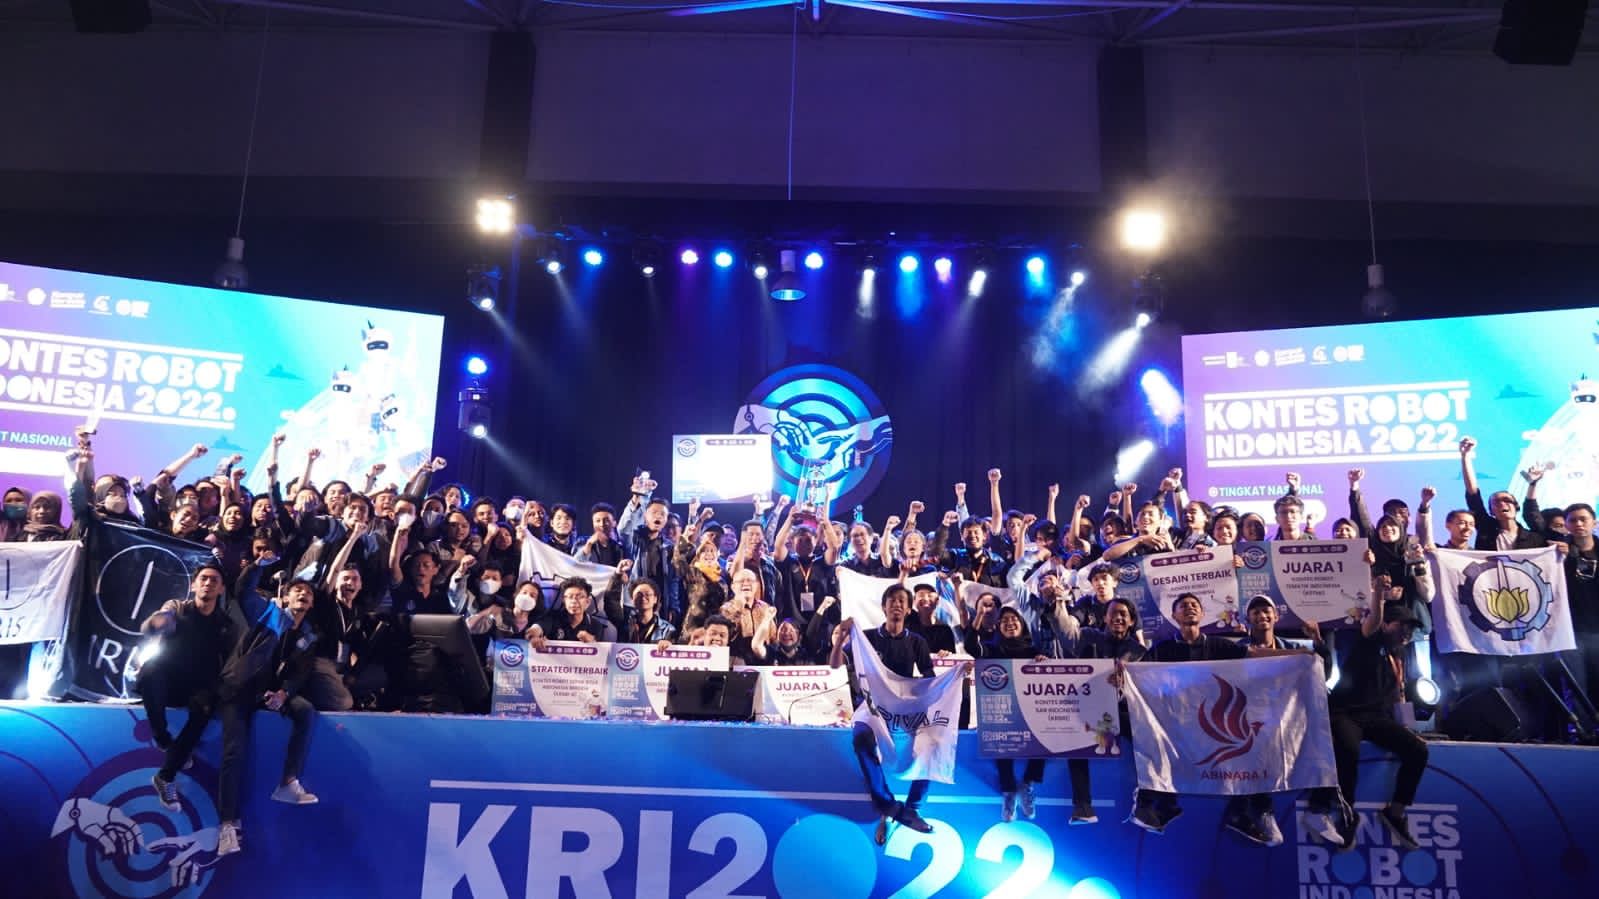 The entire ITS robotics team who have competed and become champions with the ranks of ITS leadership on the KRI 2022 closing ceremony stage at the ITS Robotics Center Building